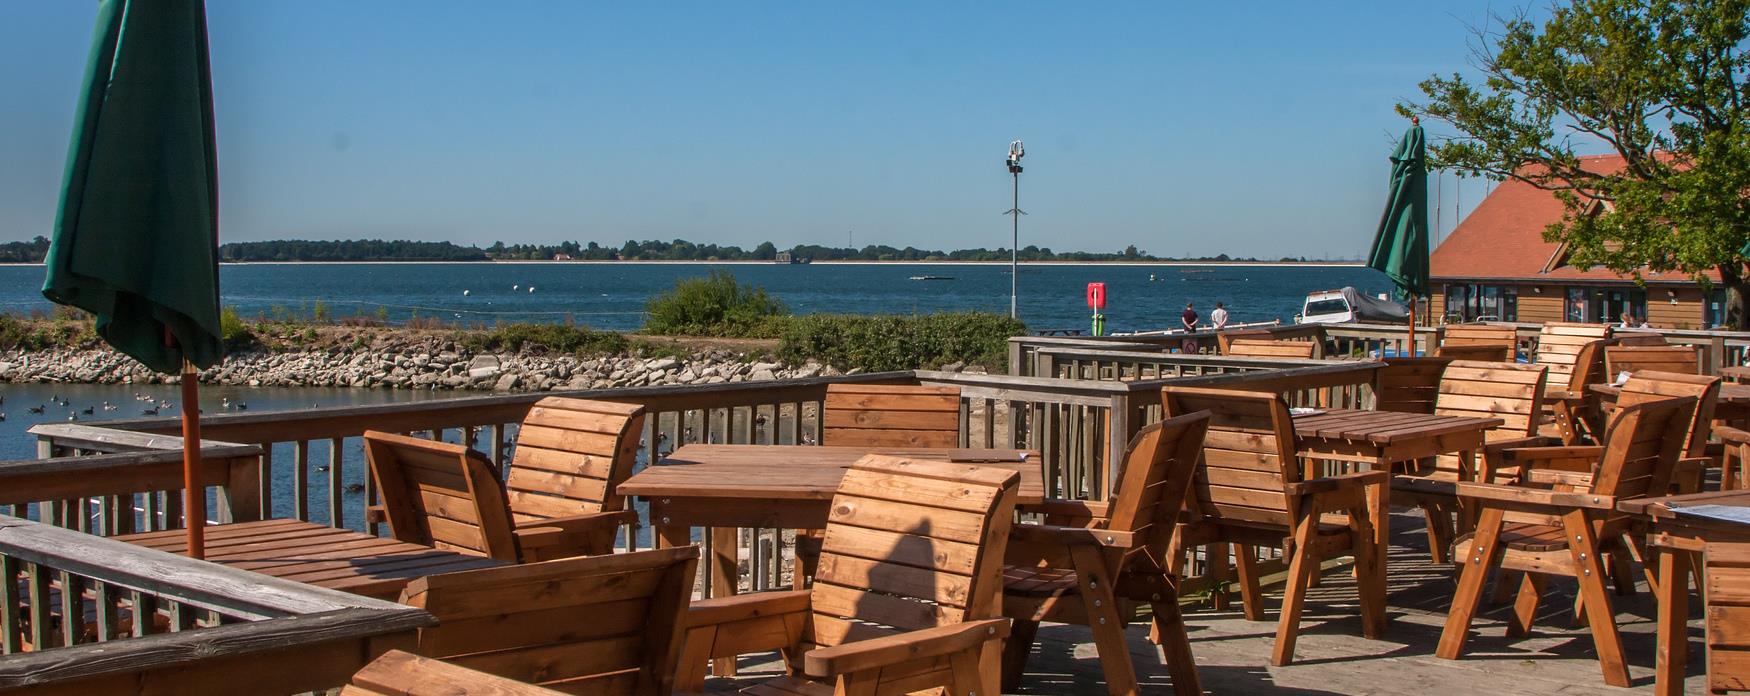 Café on the Water at Hanningfield Waterside Park